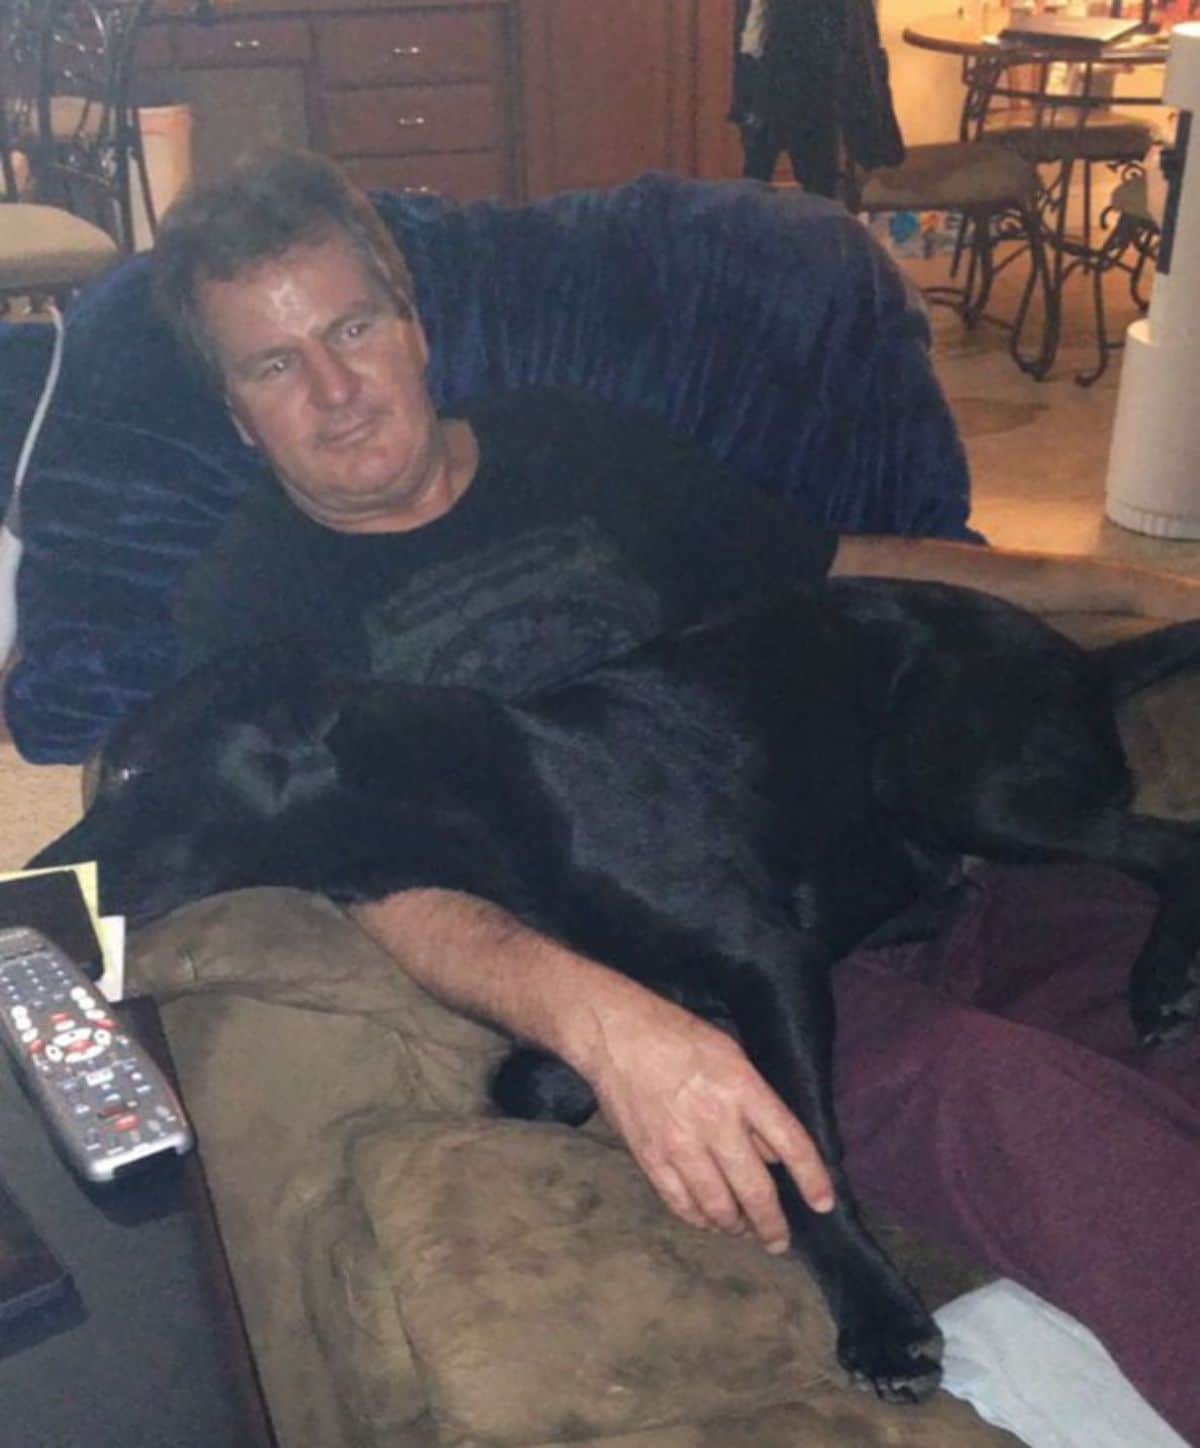 man sitting on chair with a black dog laying on his lap